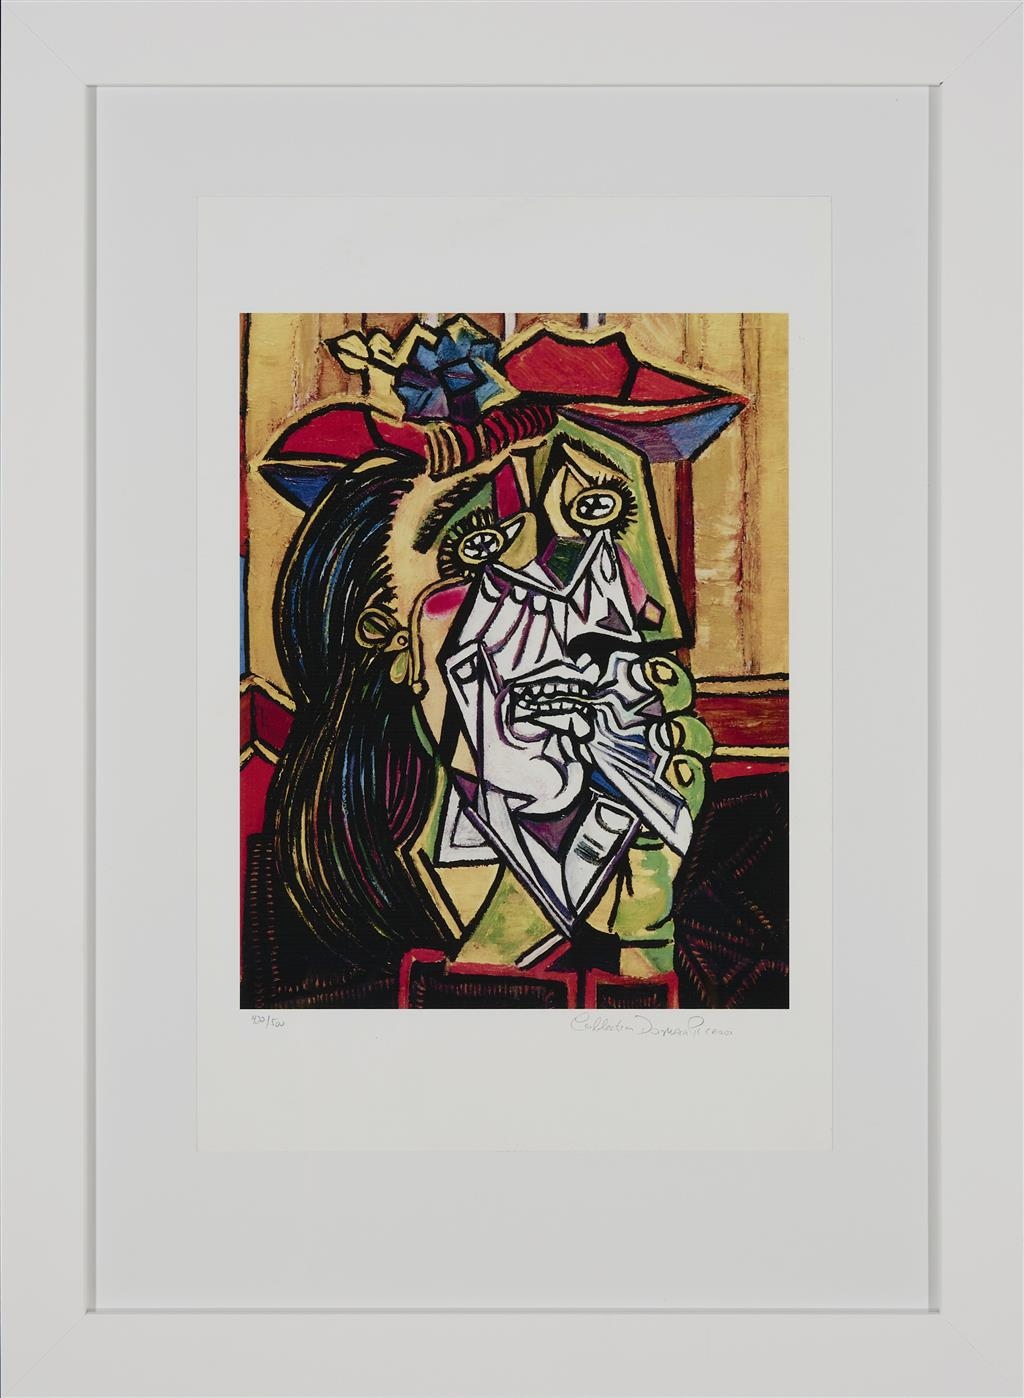 Artwork by Pablo Picasso, Weeping Woman with Red Hat, Made of giclee print